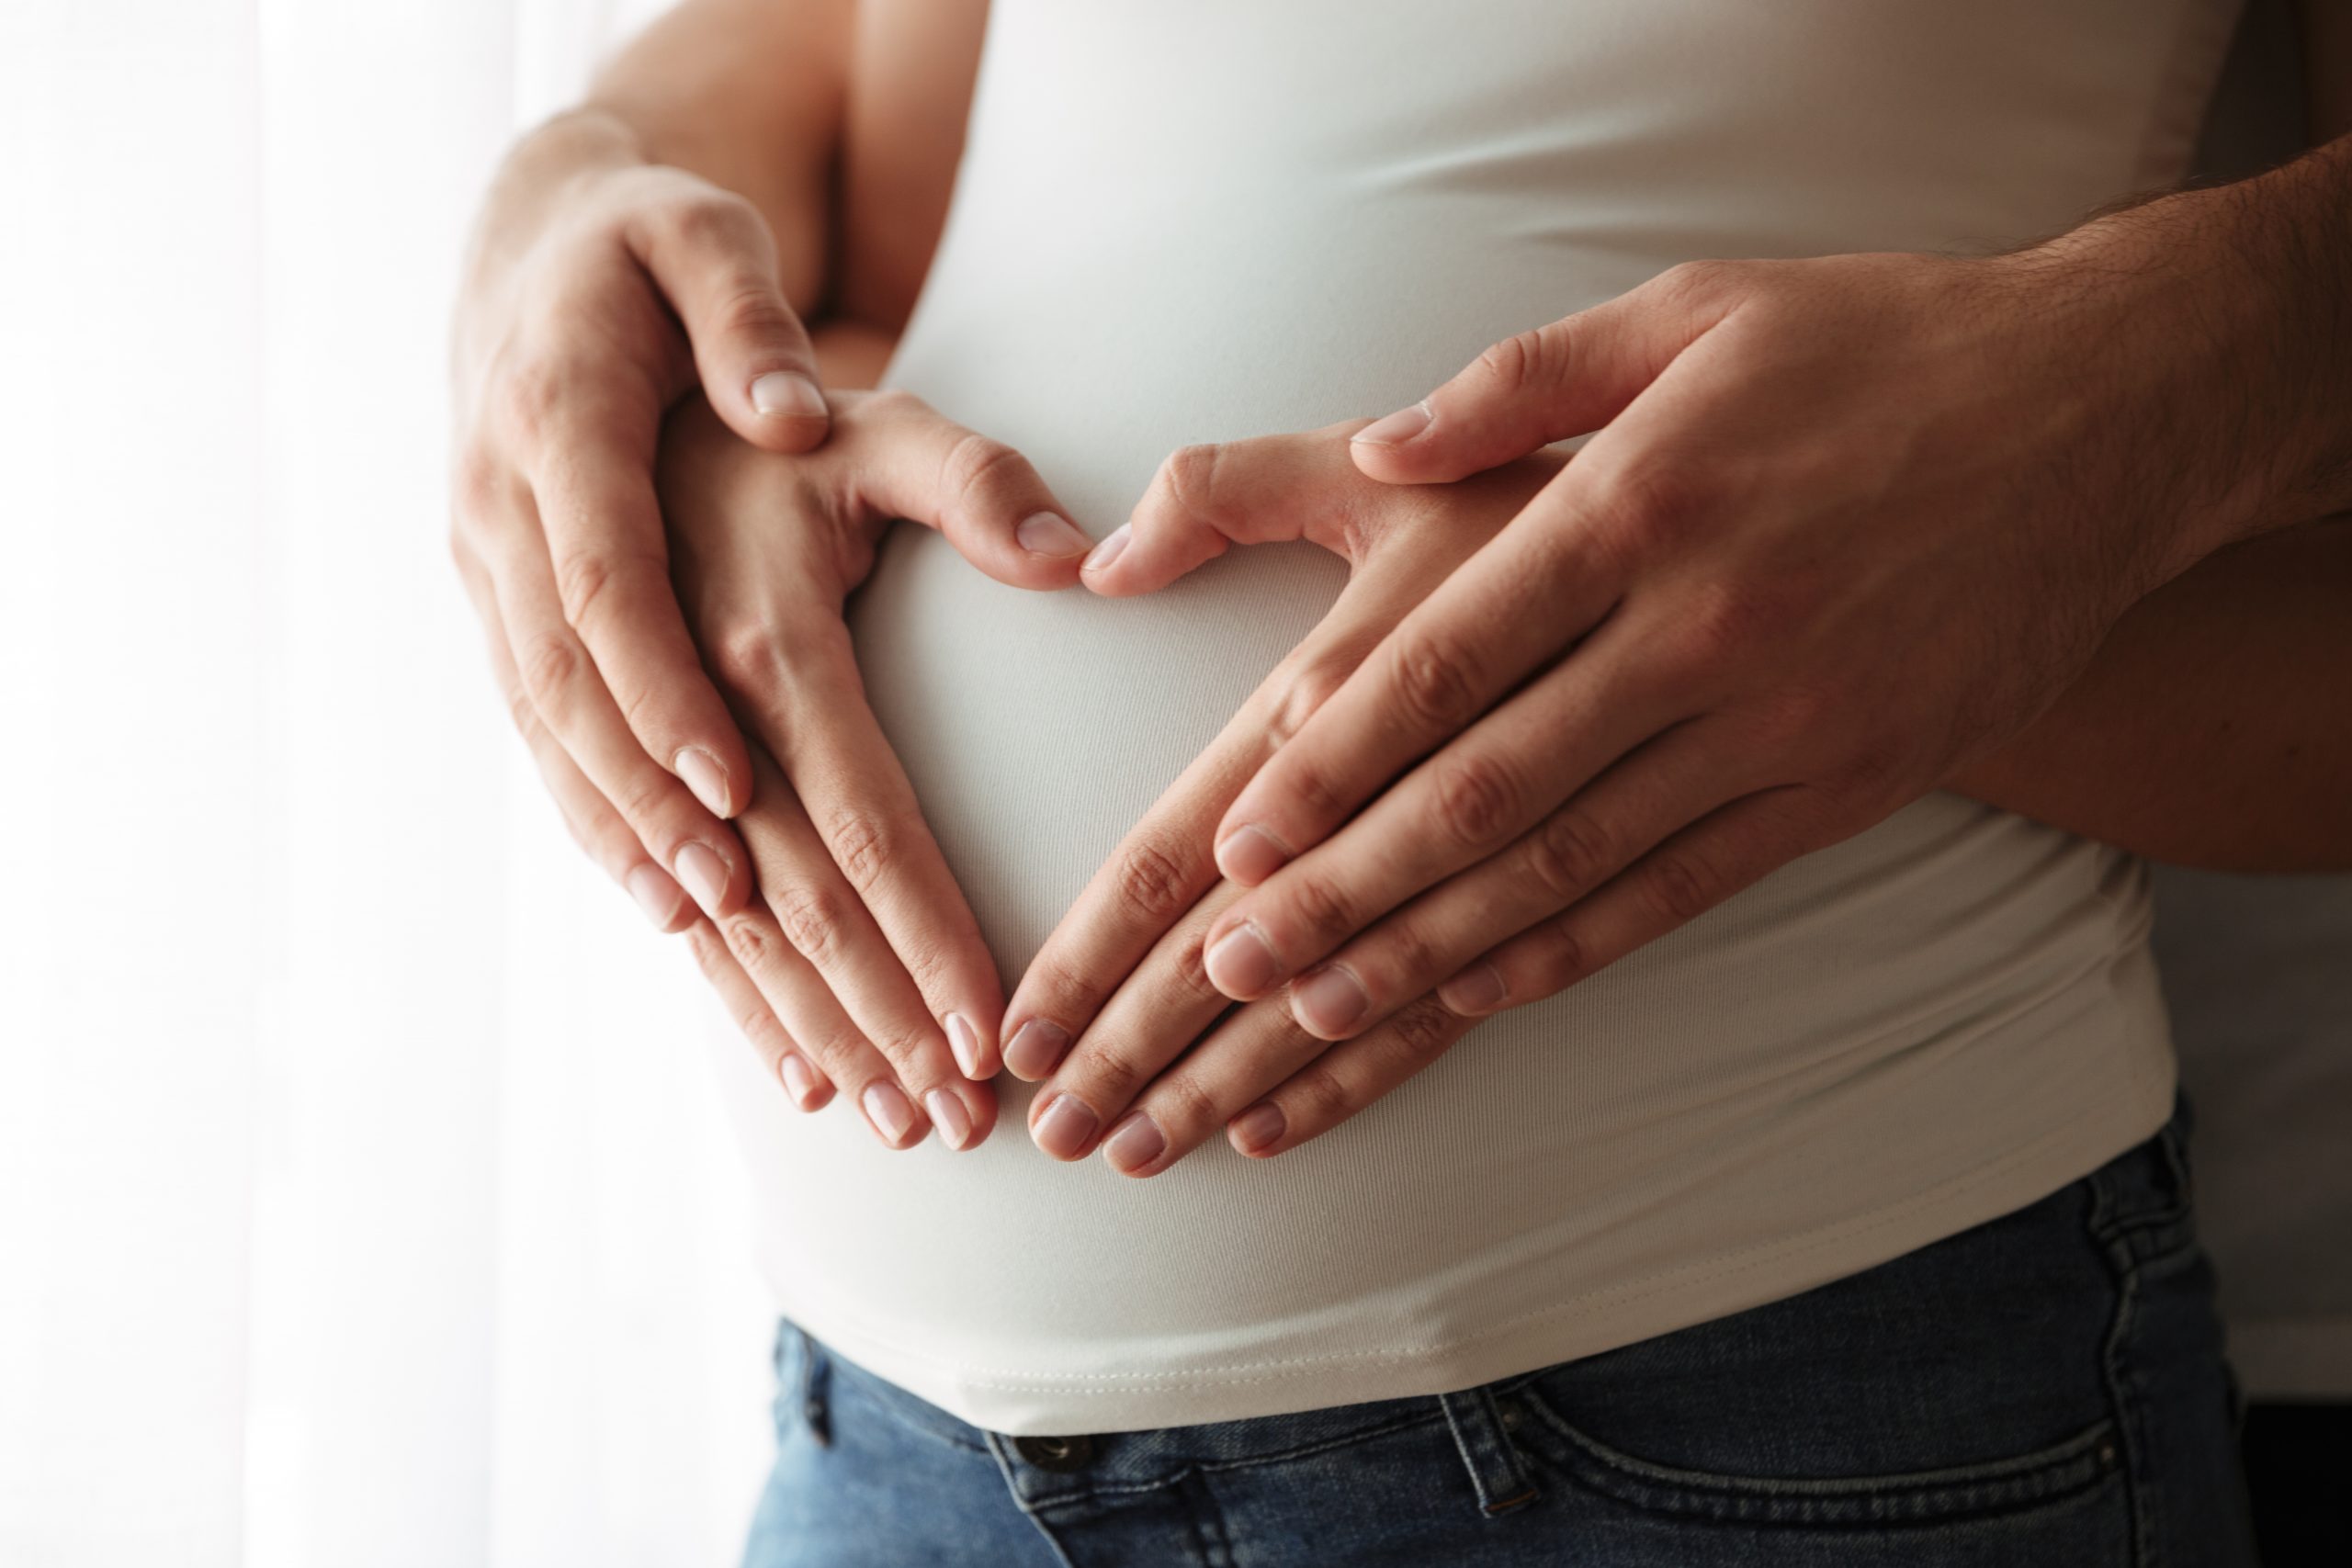 Close up portrait of man's and woman's hands making heart gesture over pregnant belly indoors